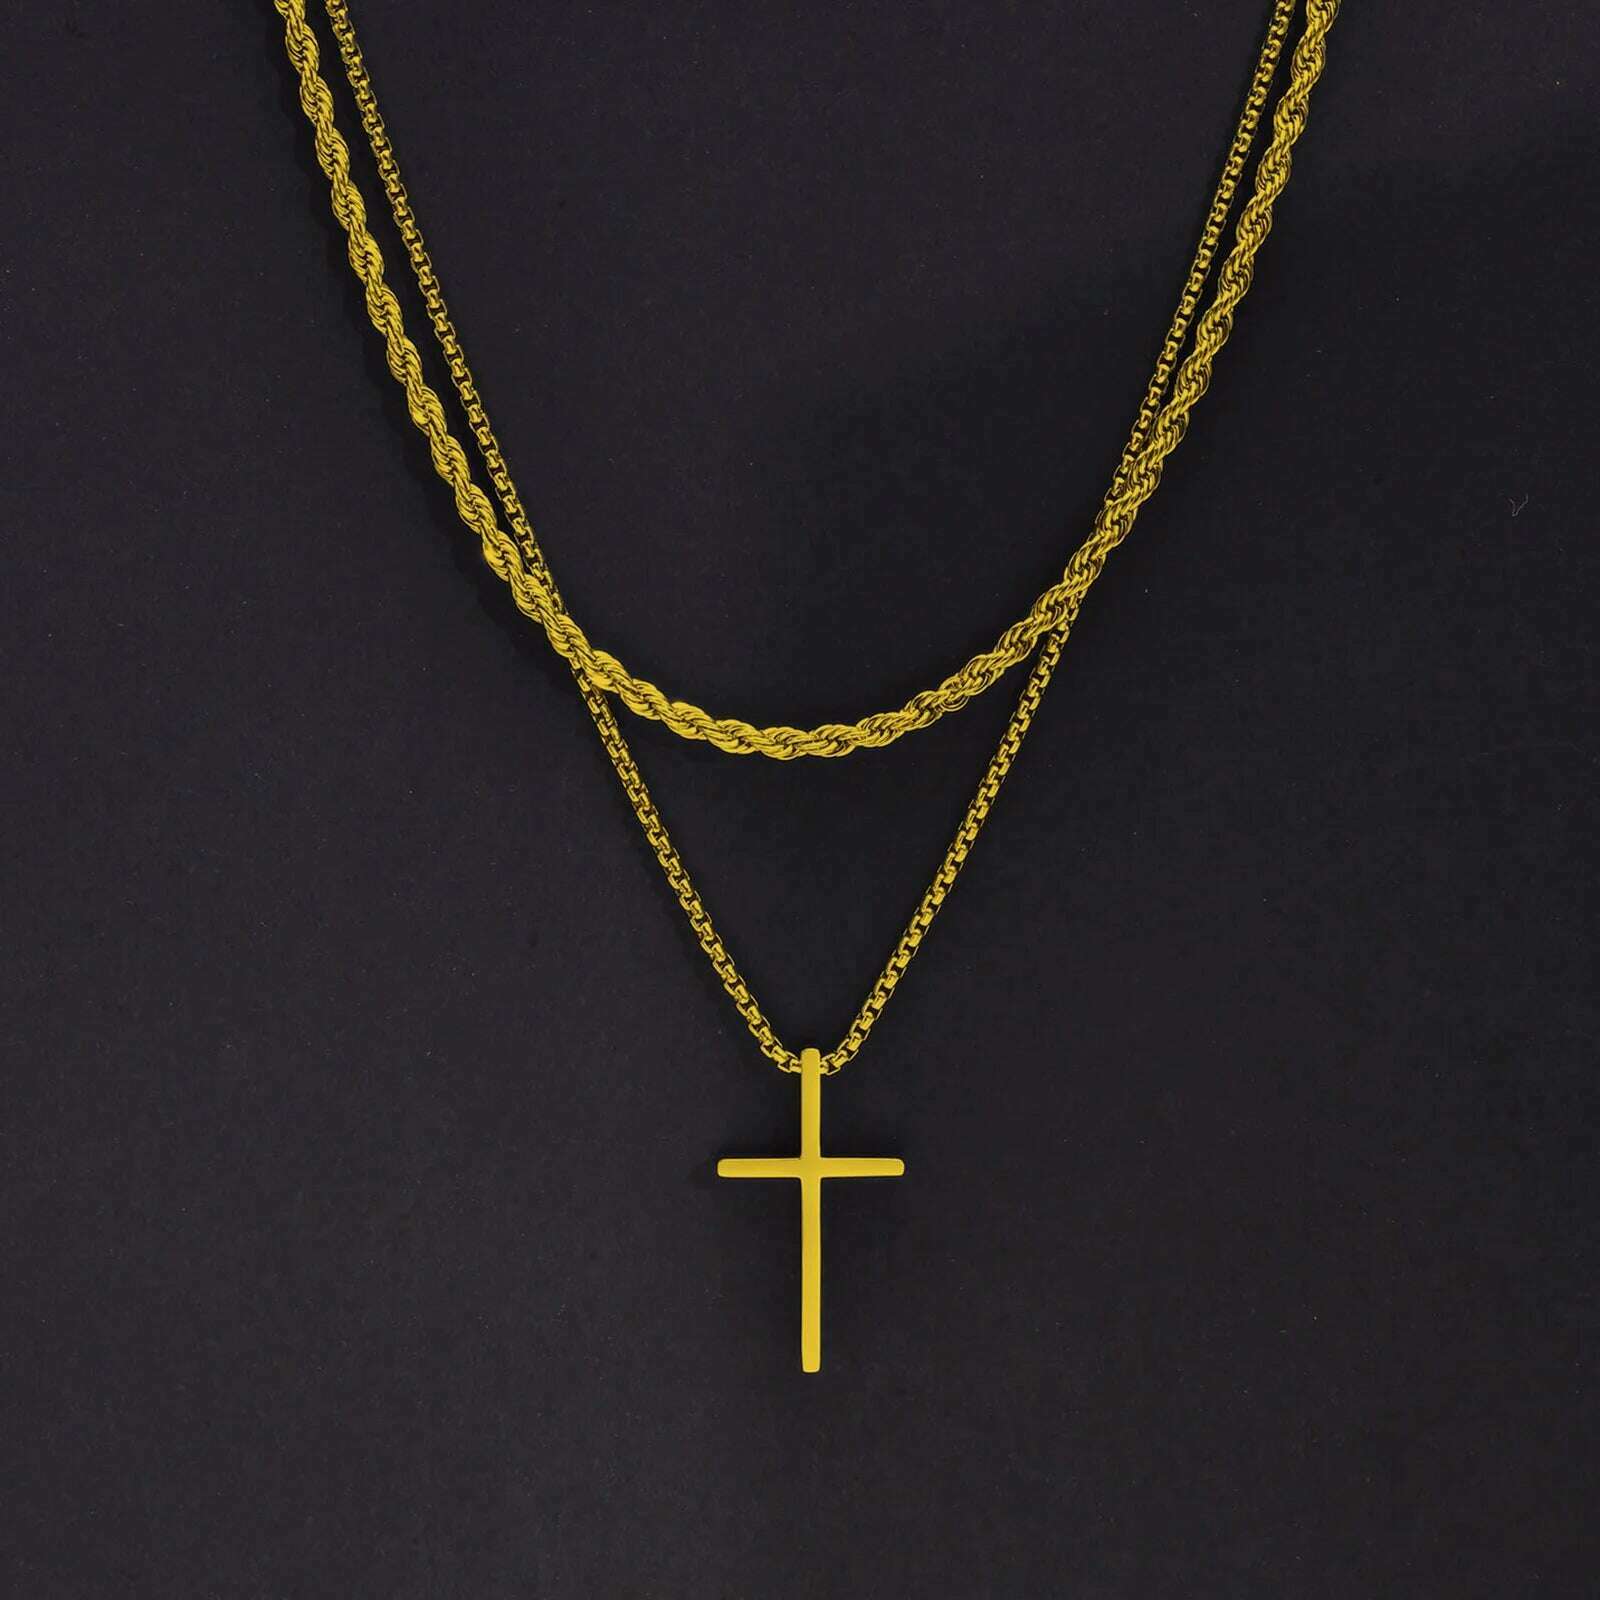 KIMLUD, Vnox Mens Cross Necklaces, Stainless Steel Layered Plain Cross Pendant, Rope Box Chain Necklace, Simple Prayer Jesus Collar, NC-1035G NC-039-55G, KIMLUD Women's Clothes